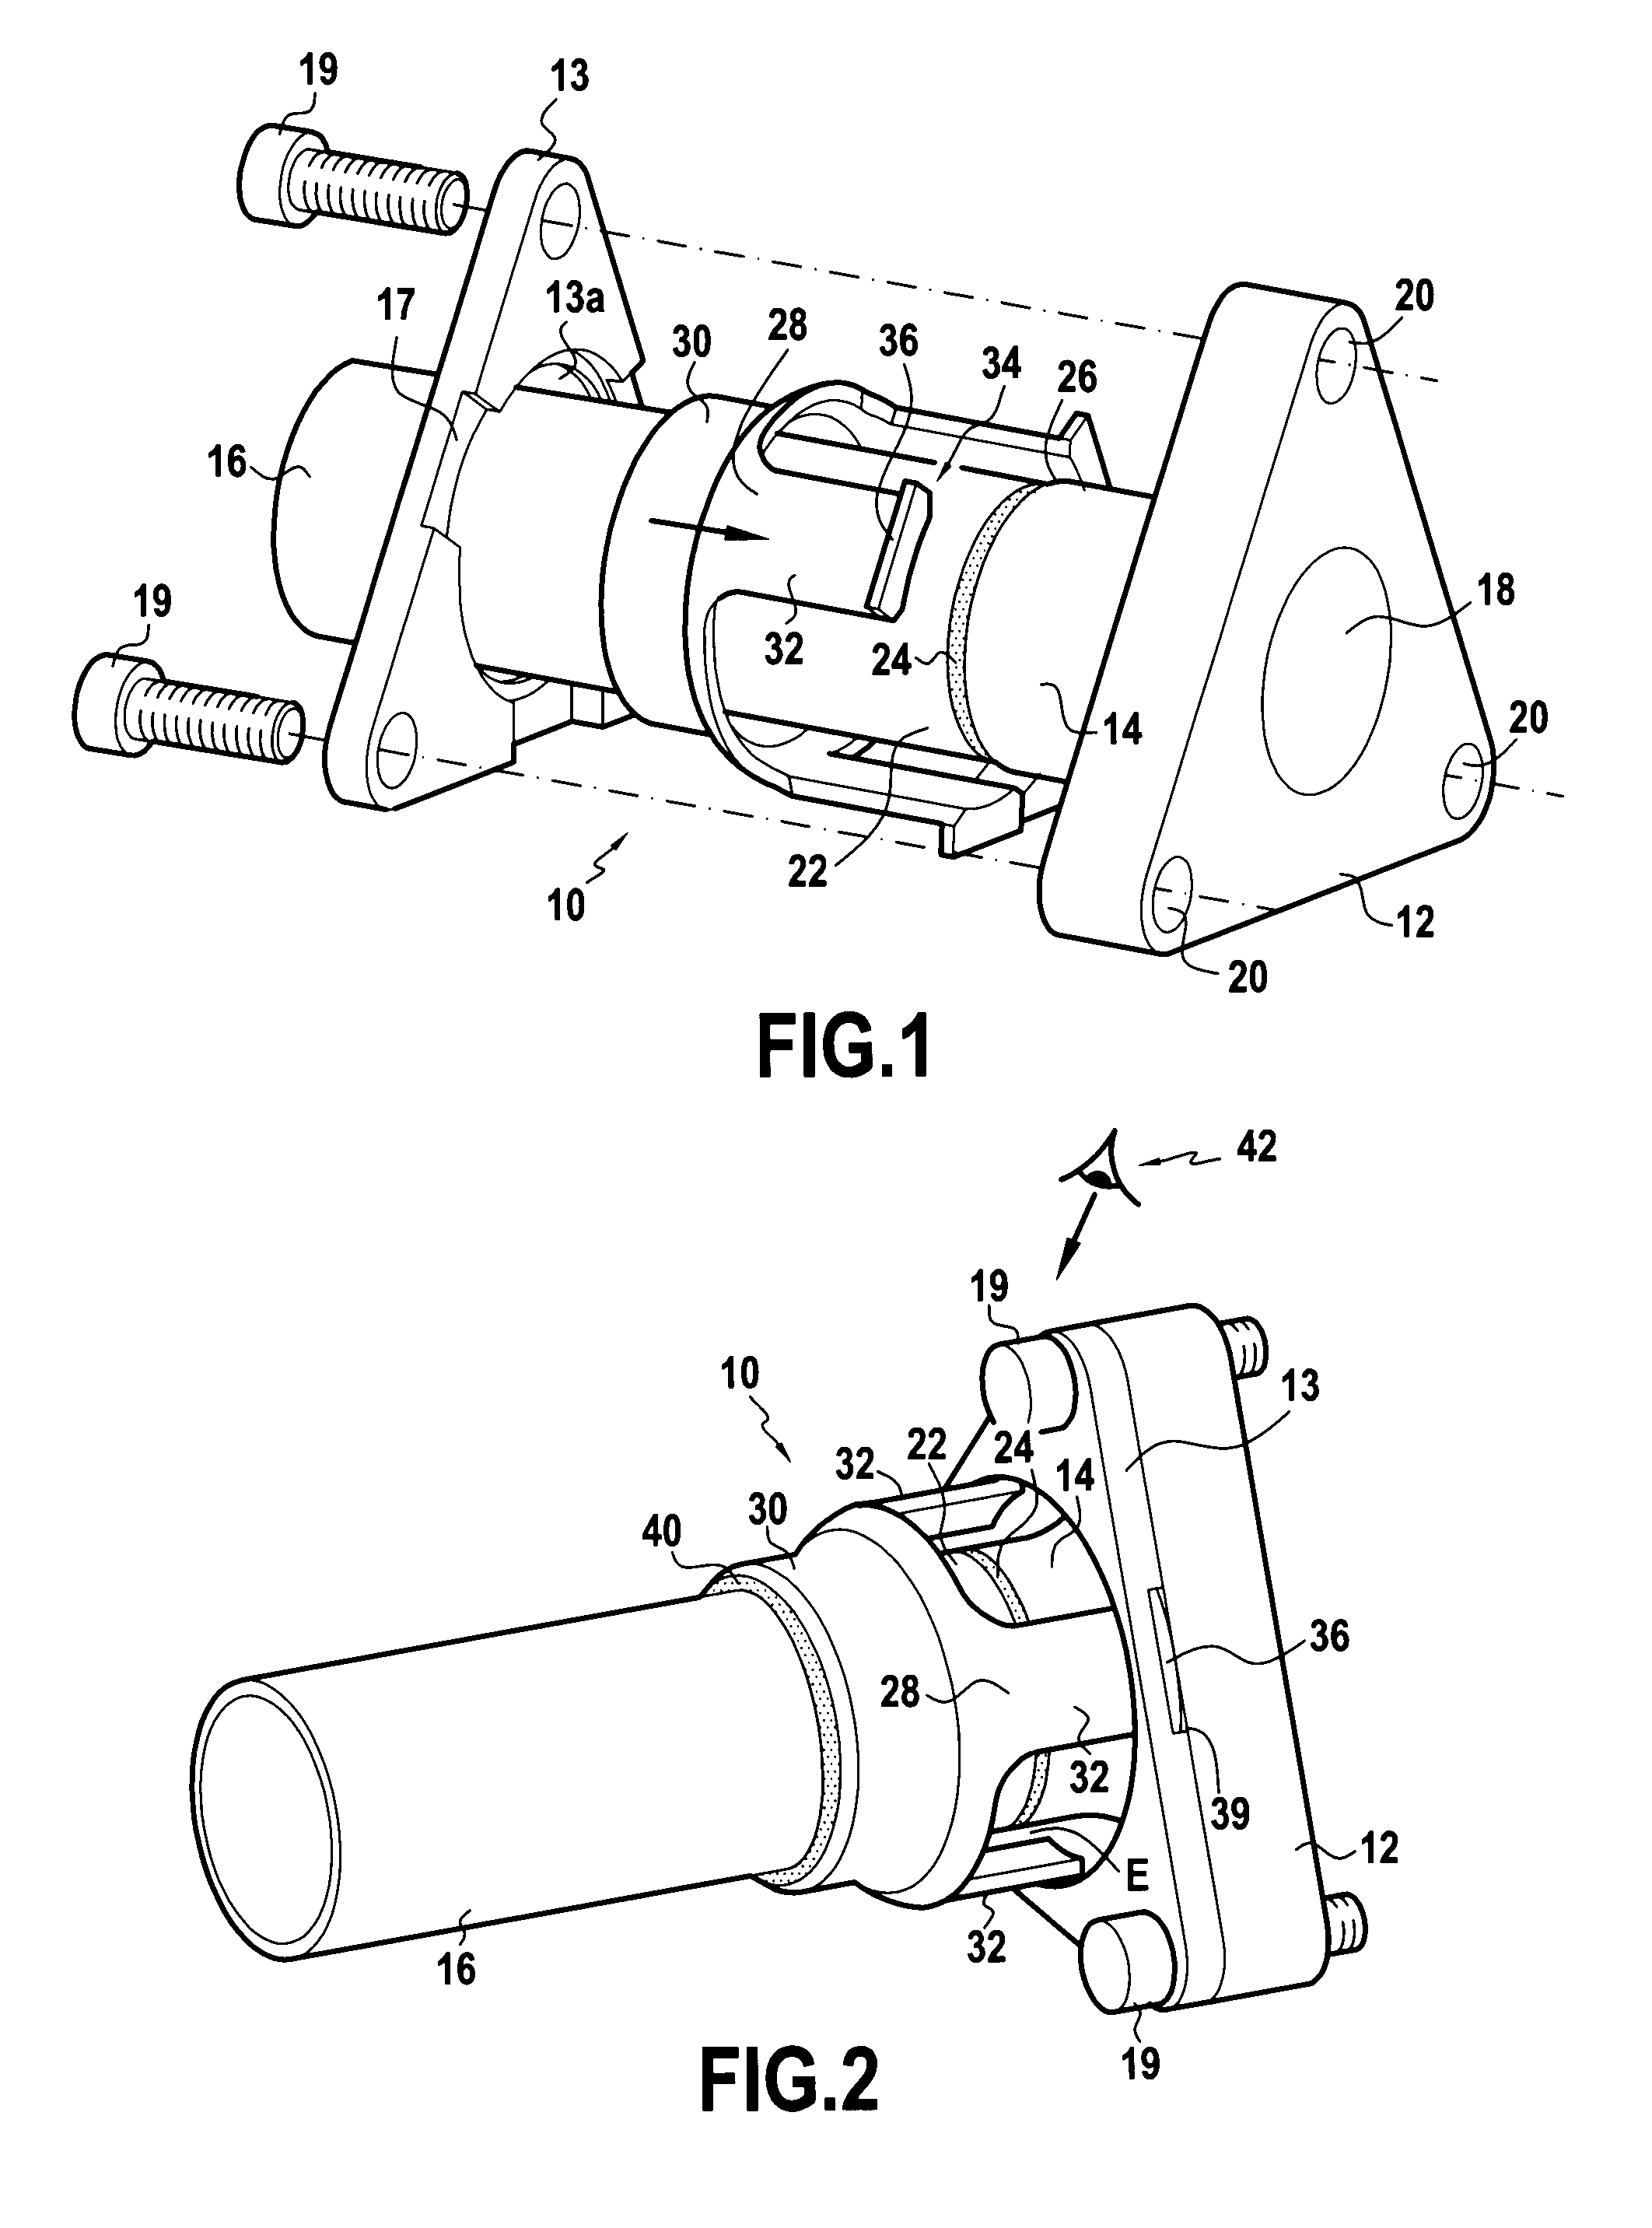 Coupling system including a safety fastener device